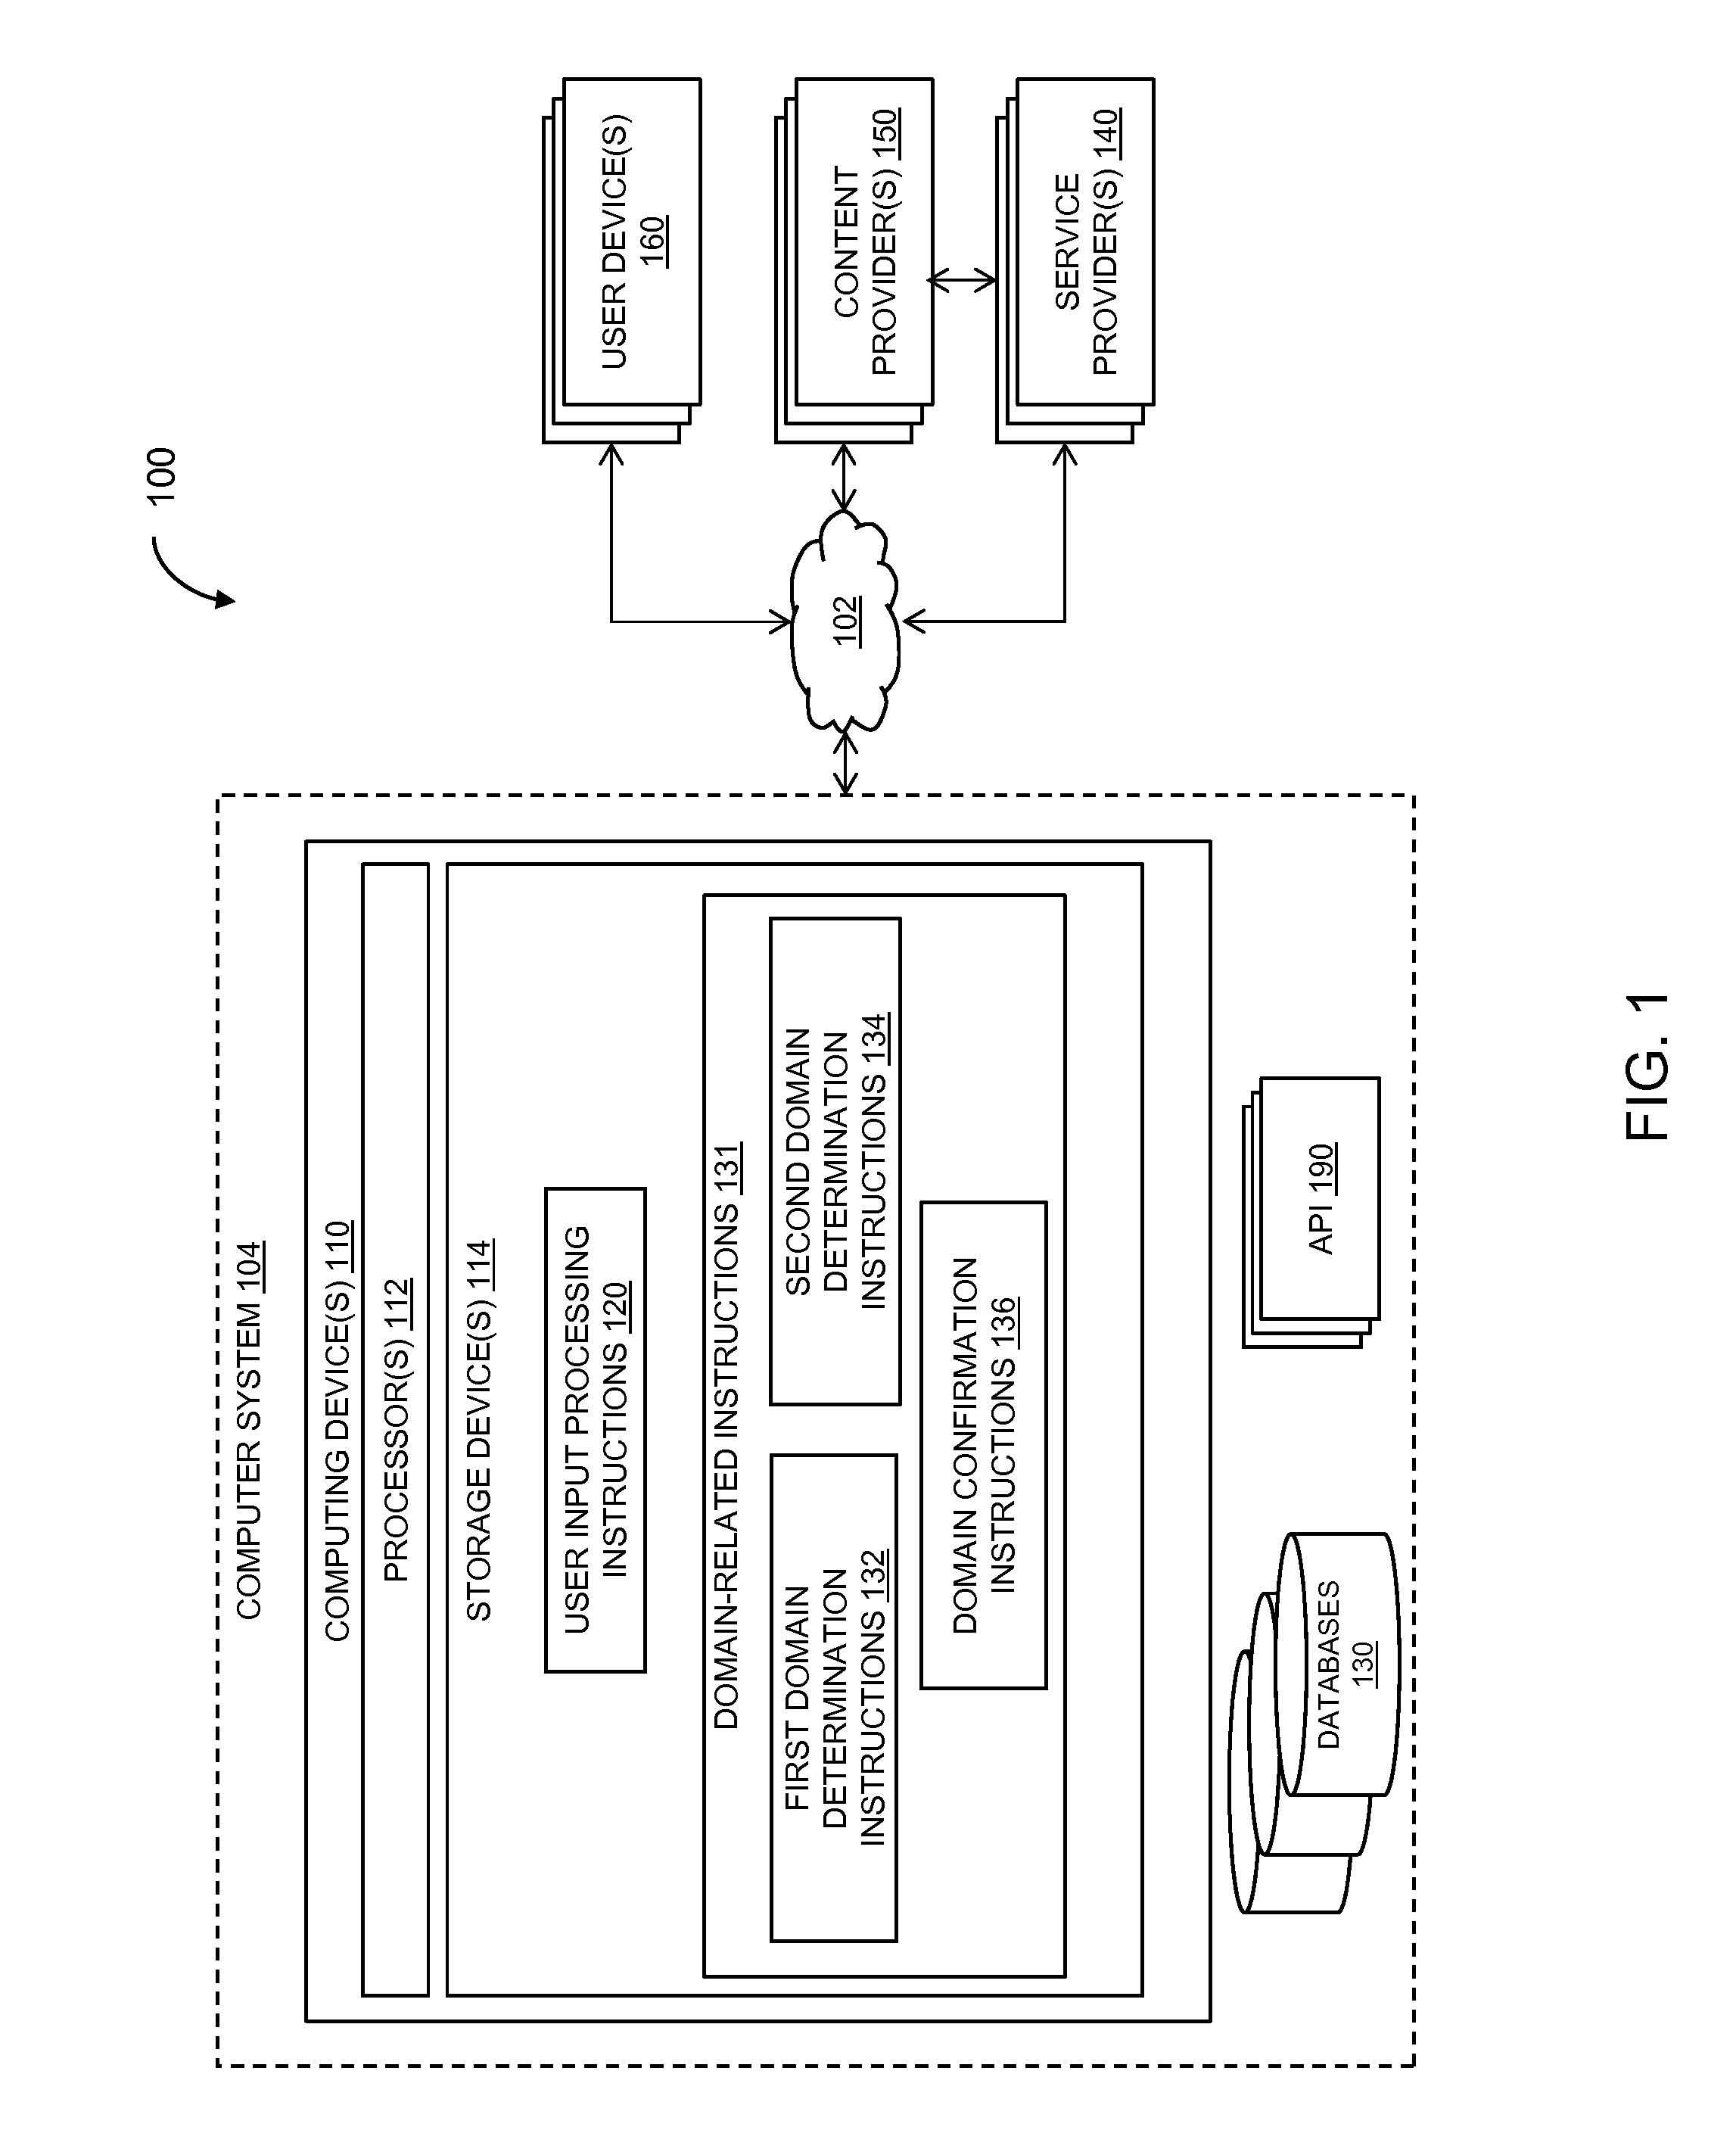 System and Method of Determining a Domain and/or an Action Related to a Natural Language Input